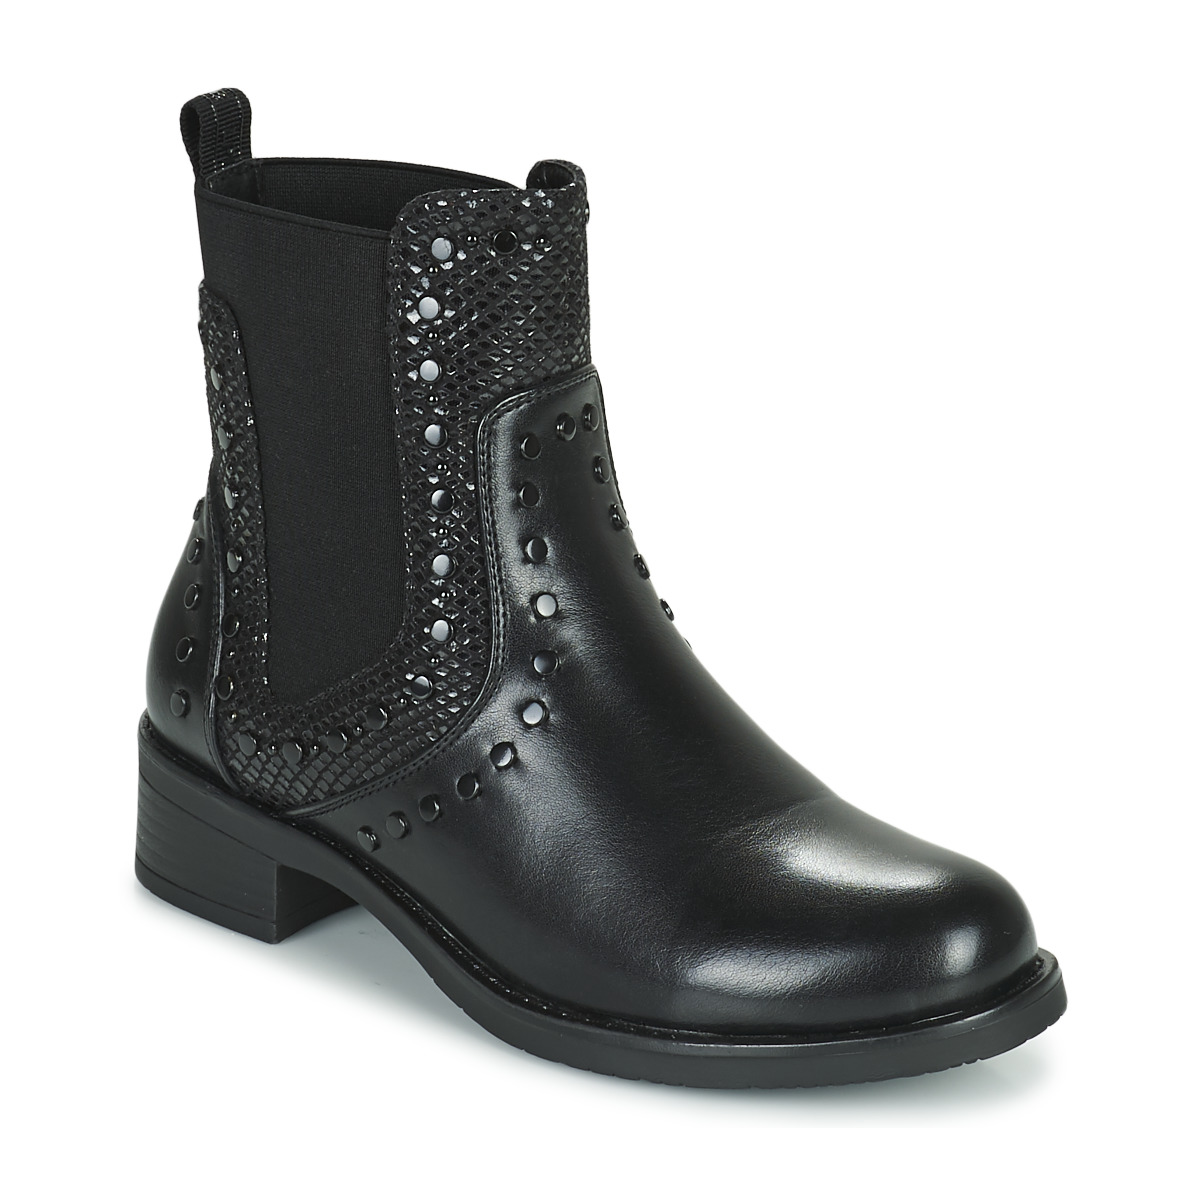 Chaussures Femme Boots This approach shoe has an all-synthetic sibling in the ALONA Noir